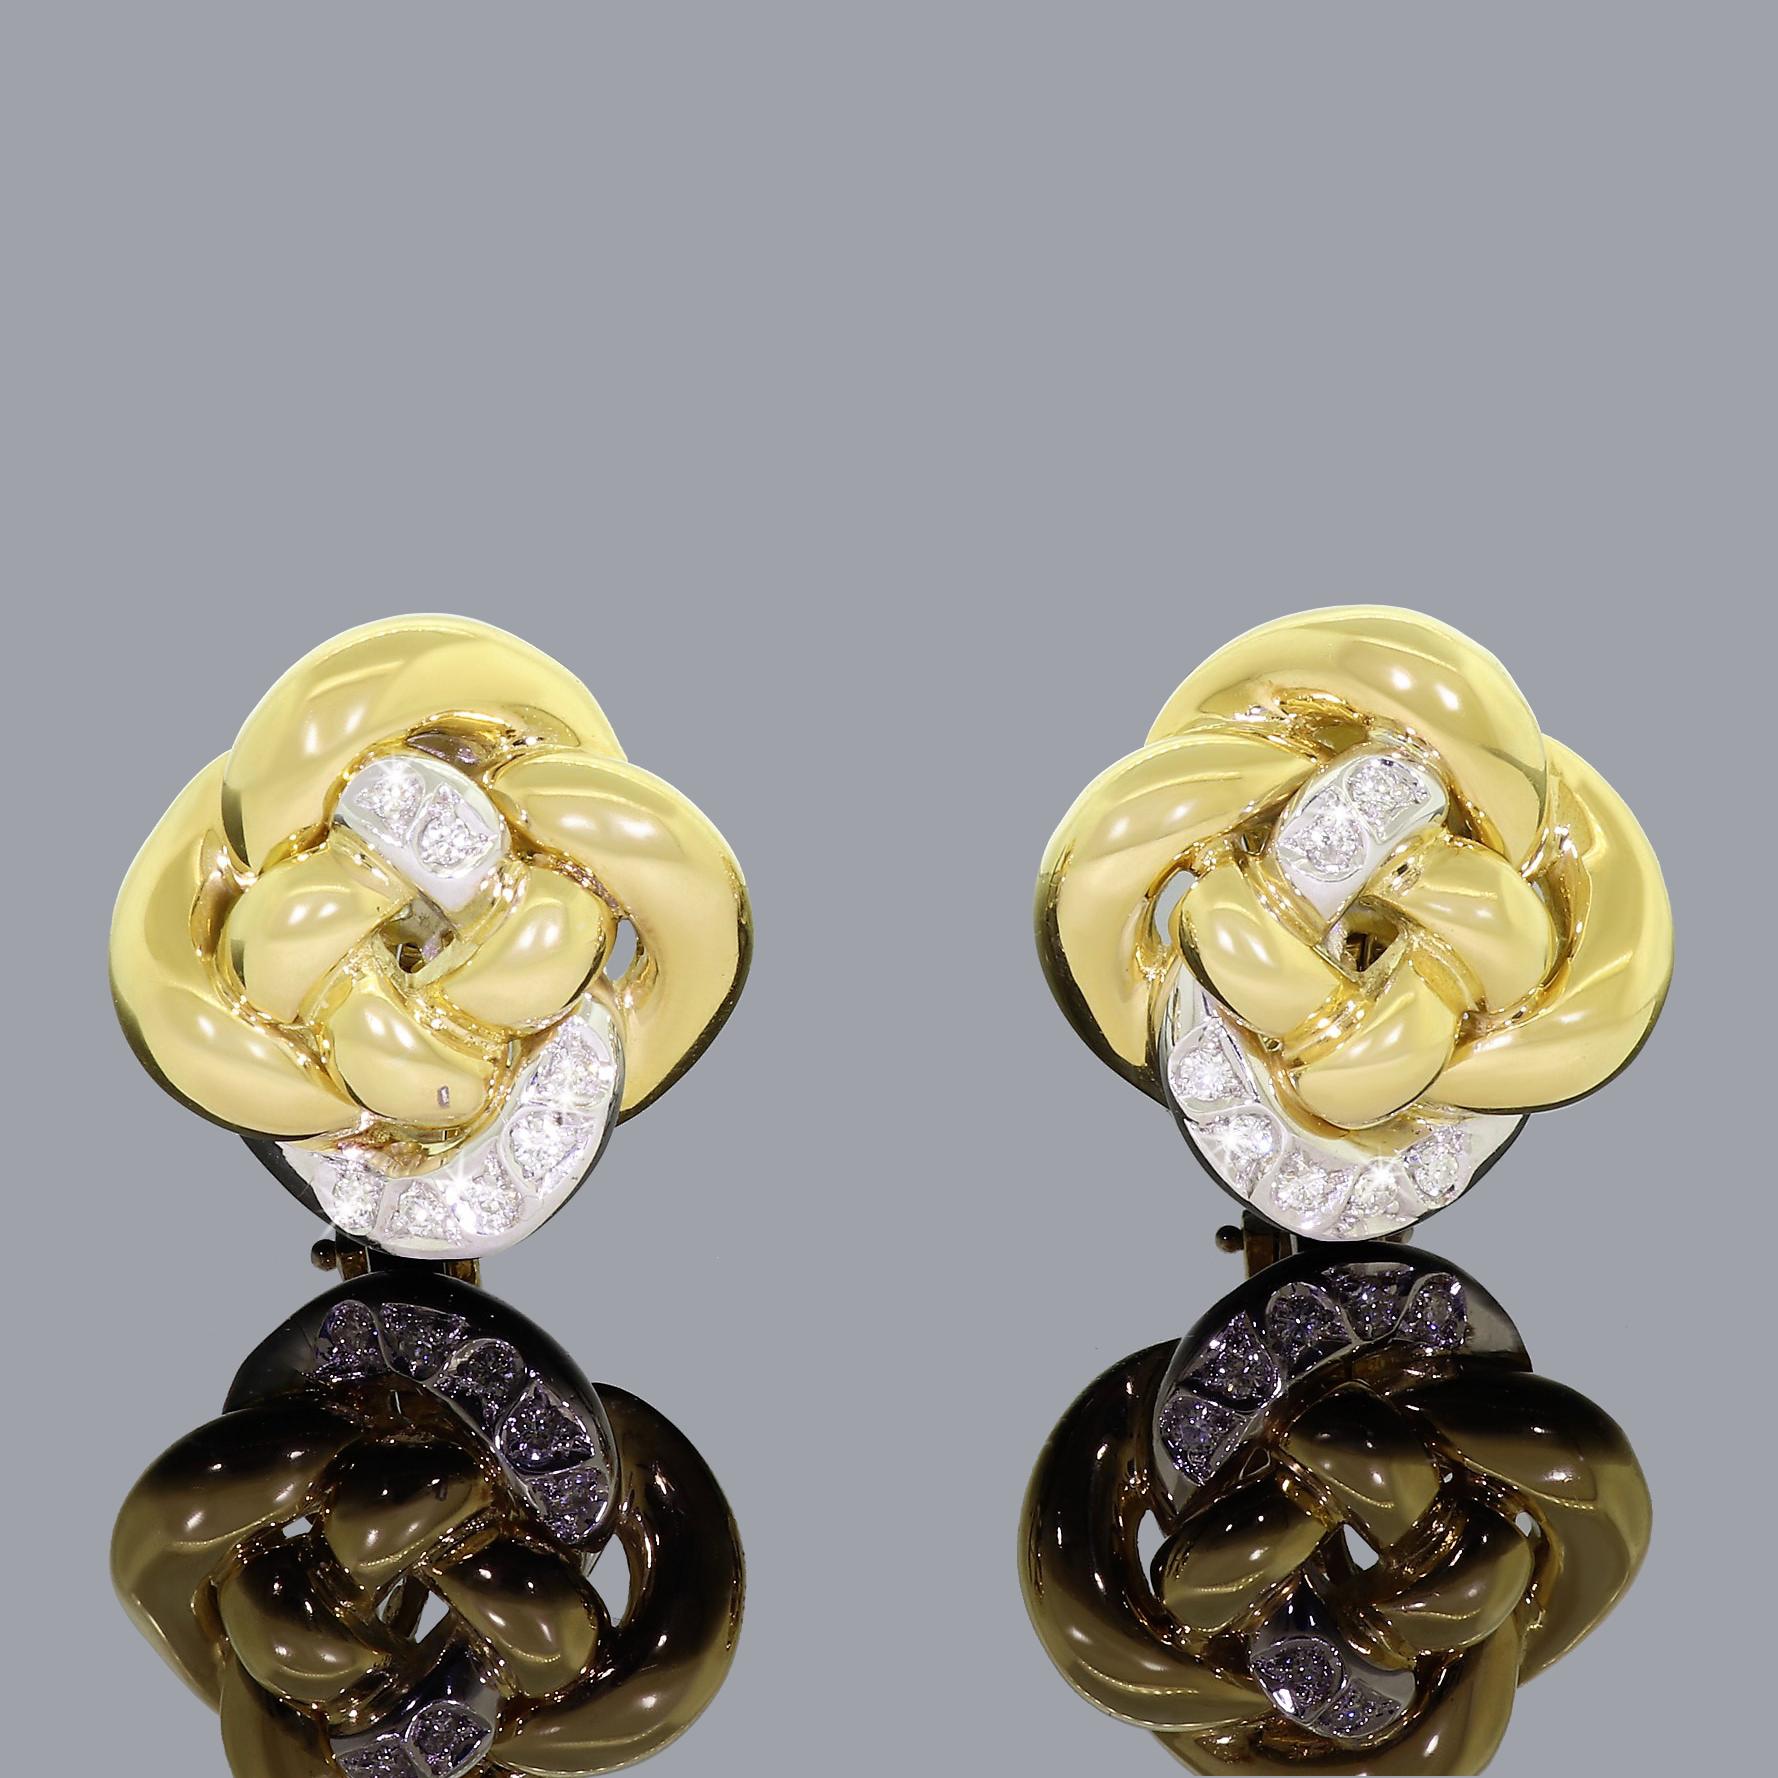 Nino Verita couture jewelry is highly sought after and very elusive. Only single digit items can be found at any given time, and of course the majority are here on 1stdibs.
Crafted out of thick, lavish 18K yellow gold. Each earring has a regal love